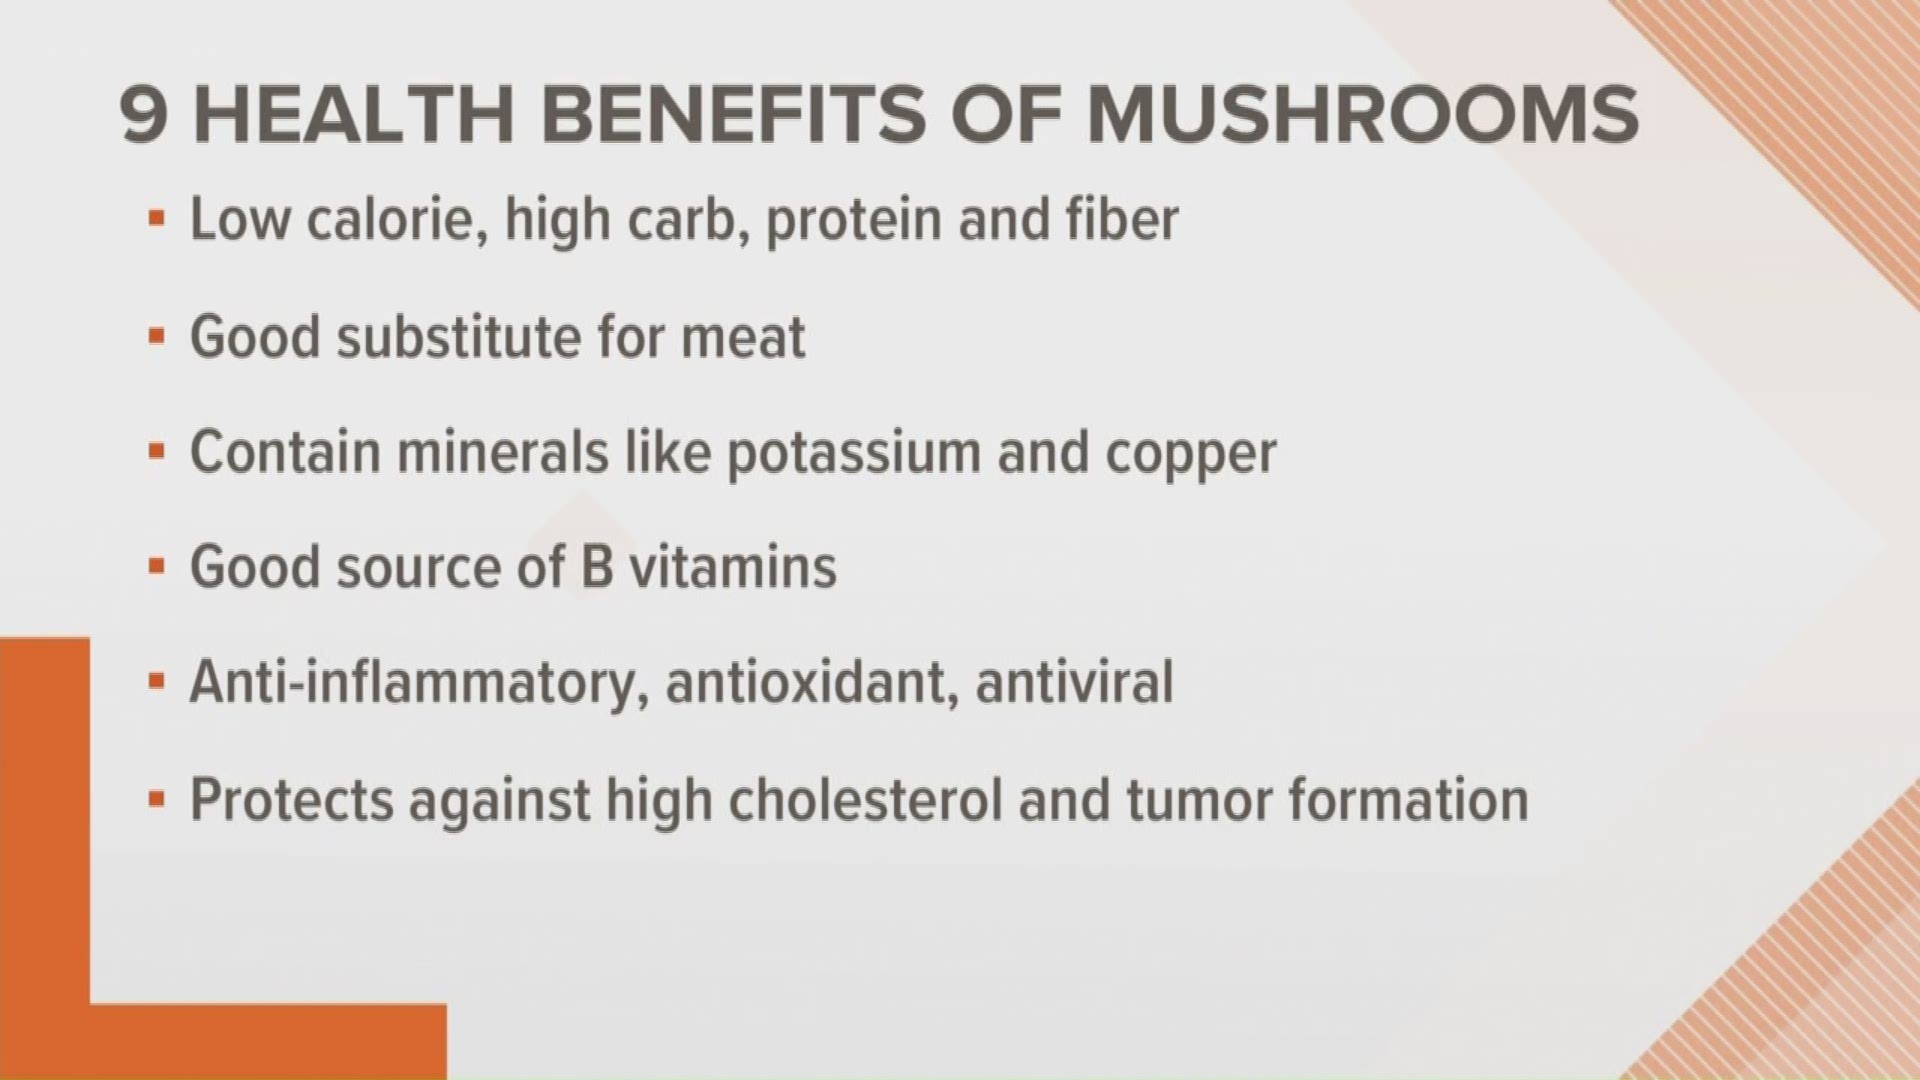 Mushrooms pack a lot of power. Here are some of their health benefits and ways to get more of them into your diet.